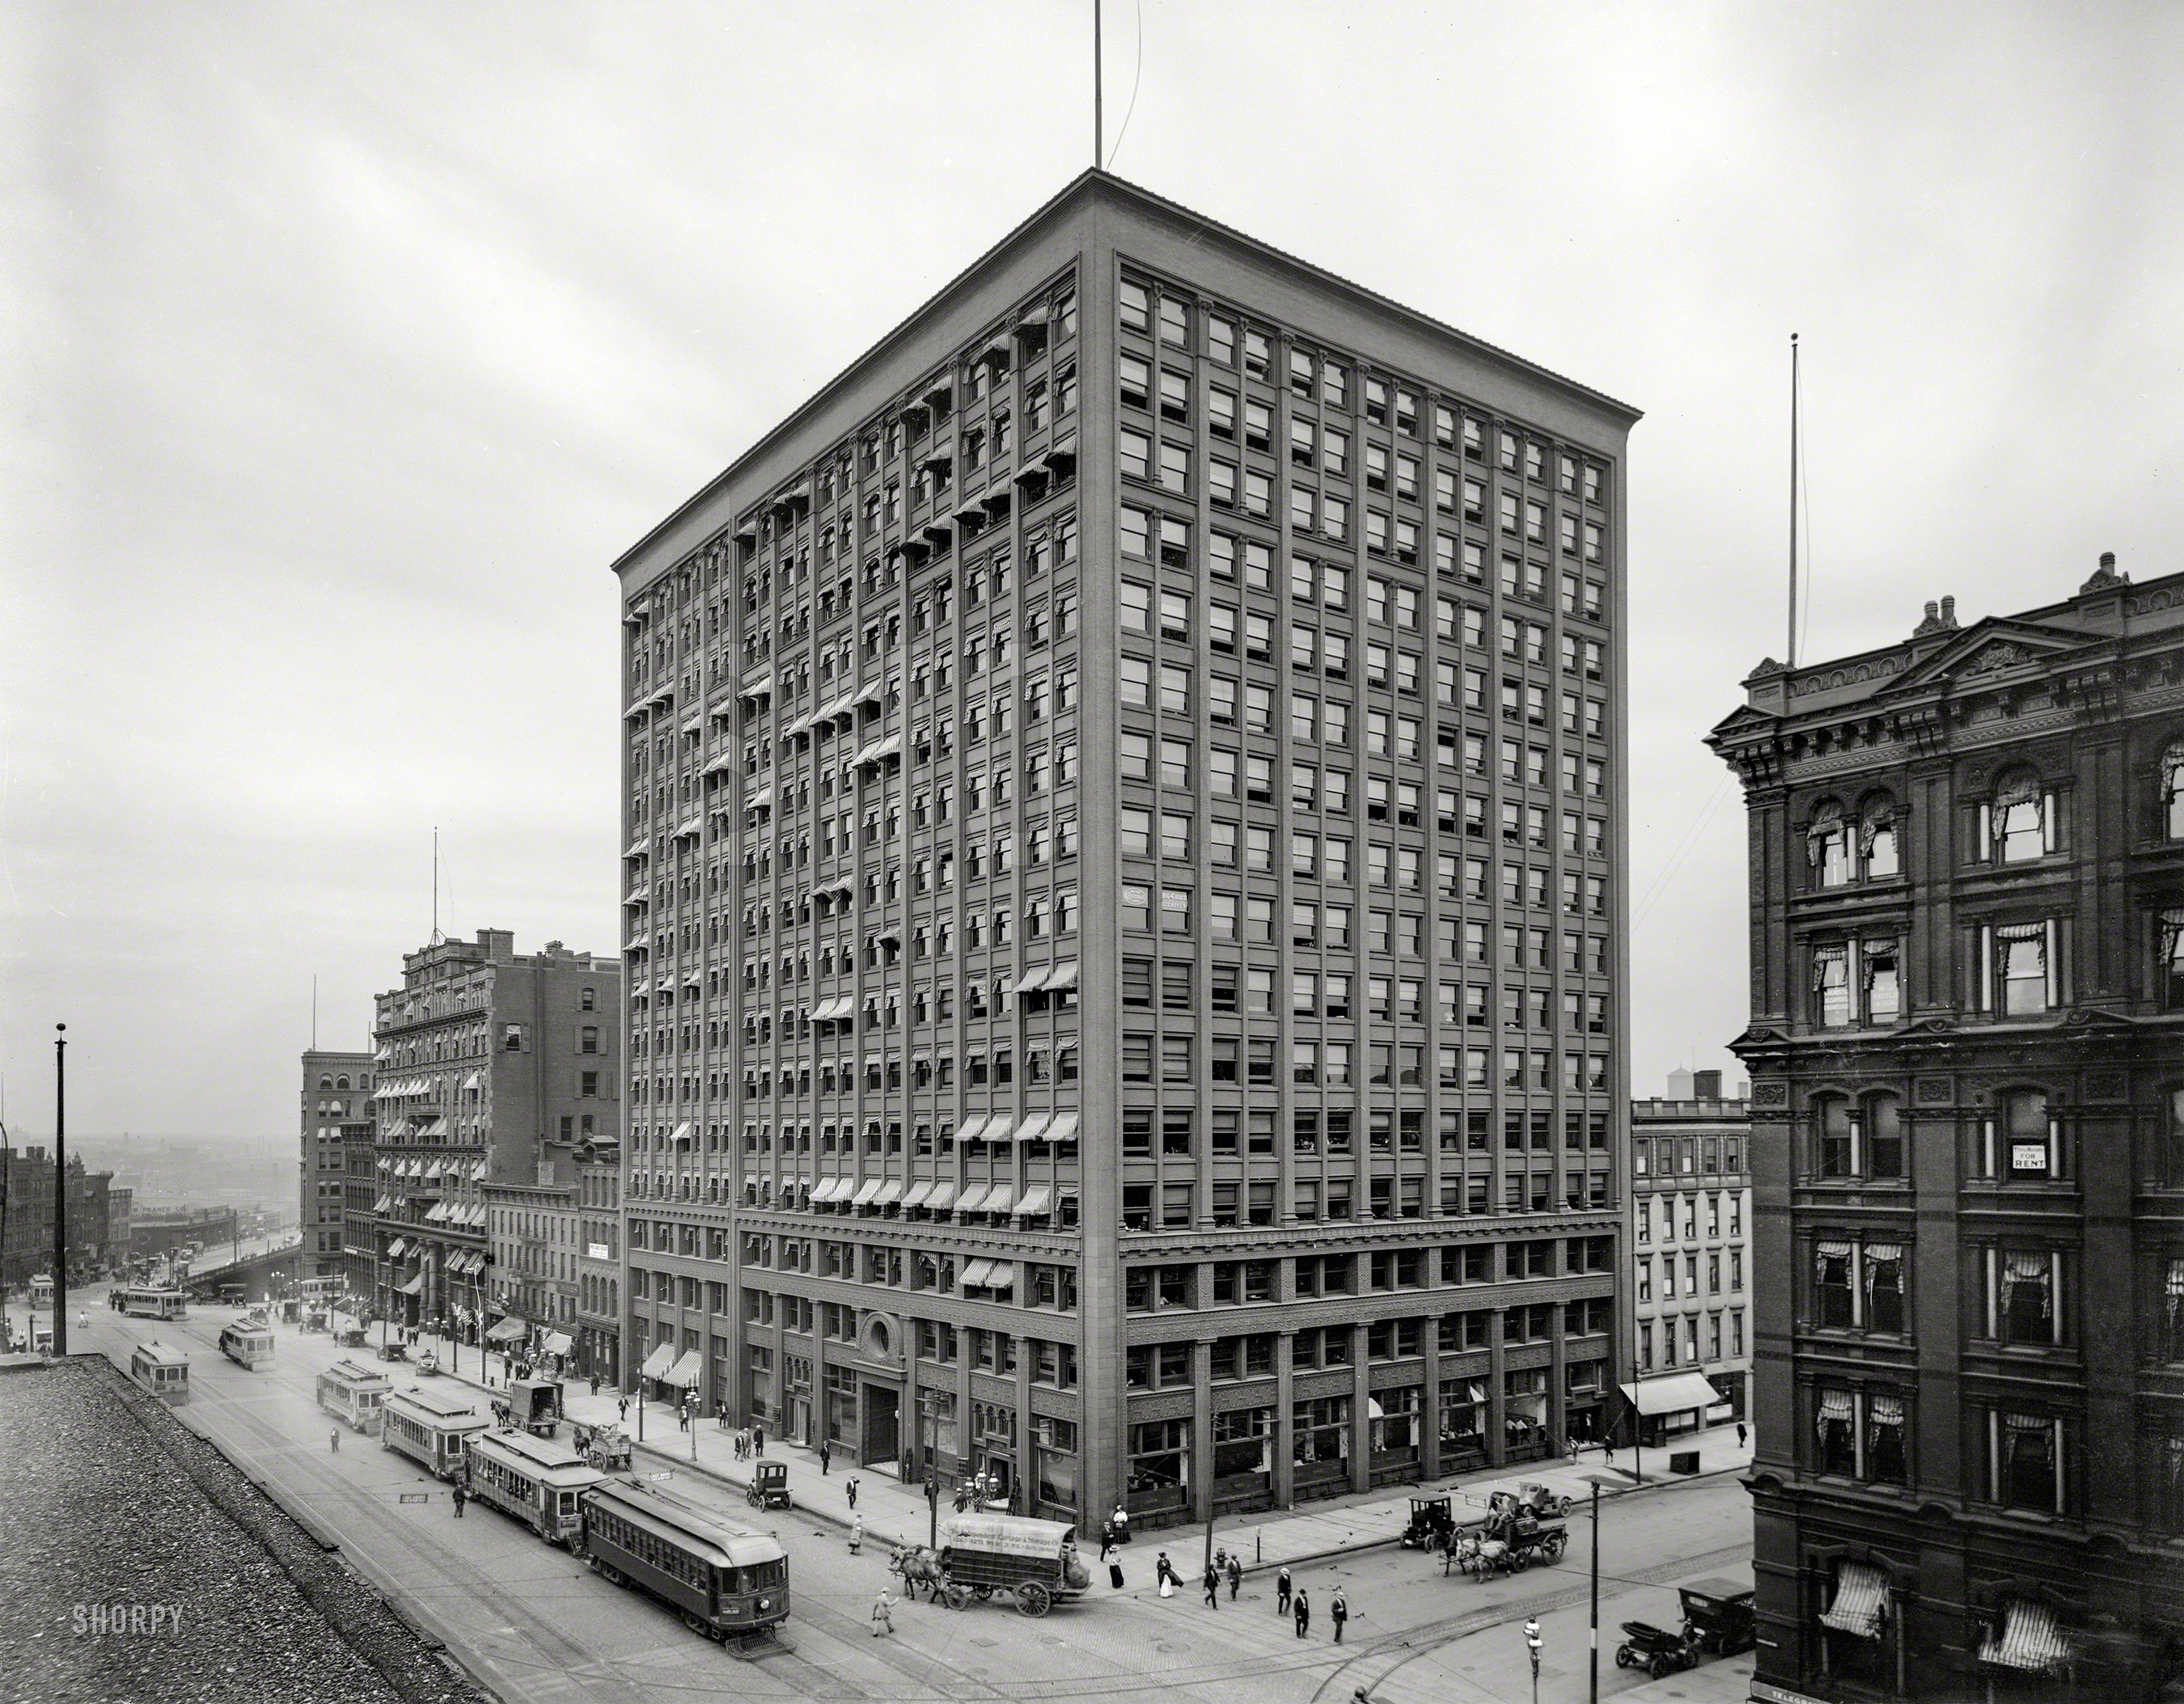 Circa 1910. "Rockefeller Building and Superior Avenue -- Cleveland, O." 8x10 inch dry plate glass negative, Detroit Publishing Company. View full size.